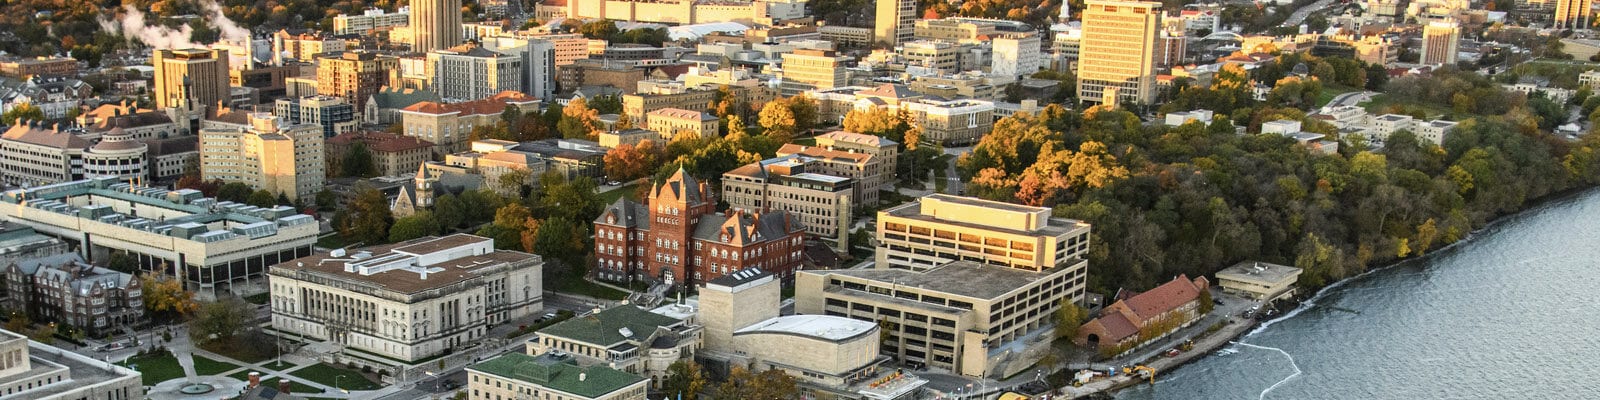 Aerial view of the UW-Madison Campus